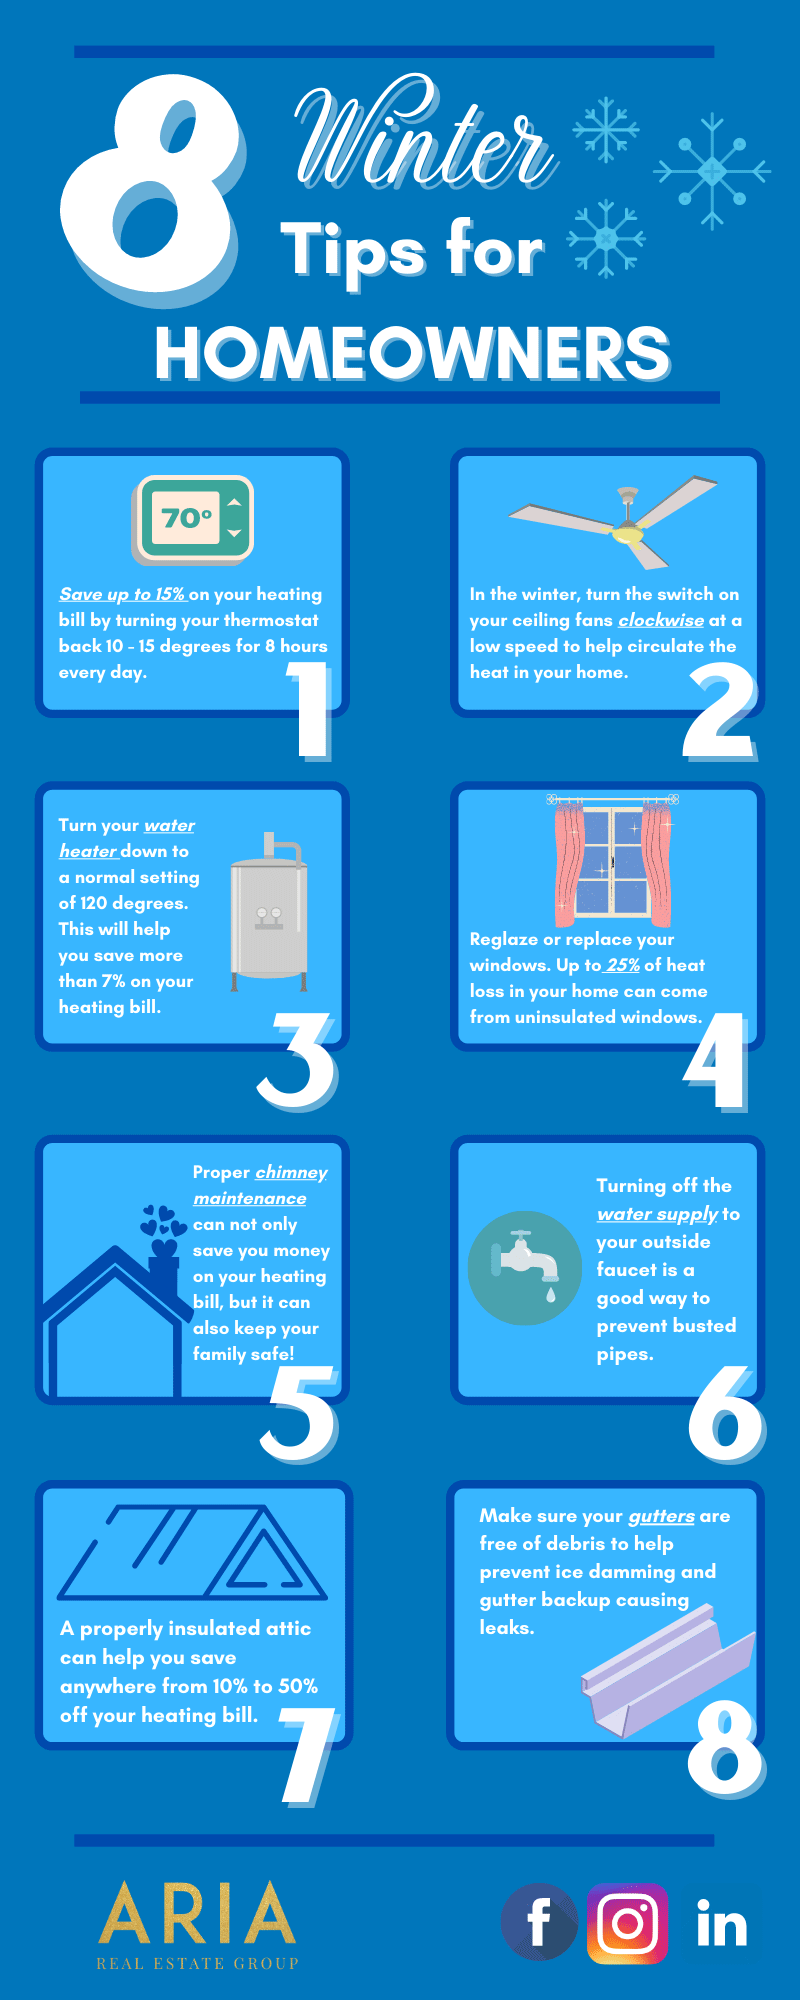 As a homeowner, it is important to take the proper steps during the colder months to get your home ready for the winter. In Oklahoma, we have weather that can feel like a roller coaster. Take advantage of the nice weather days and get your home ready for those cold winter days and months ahead!